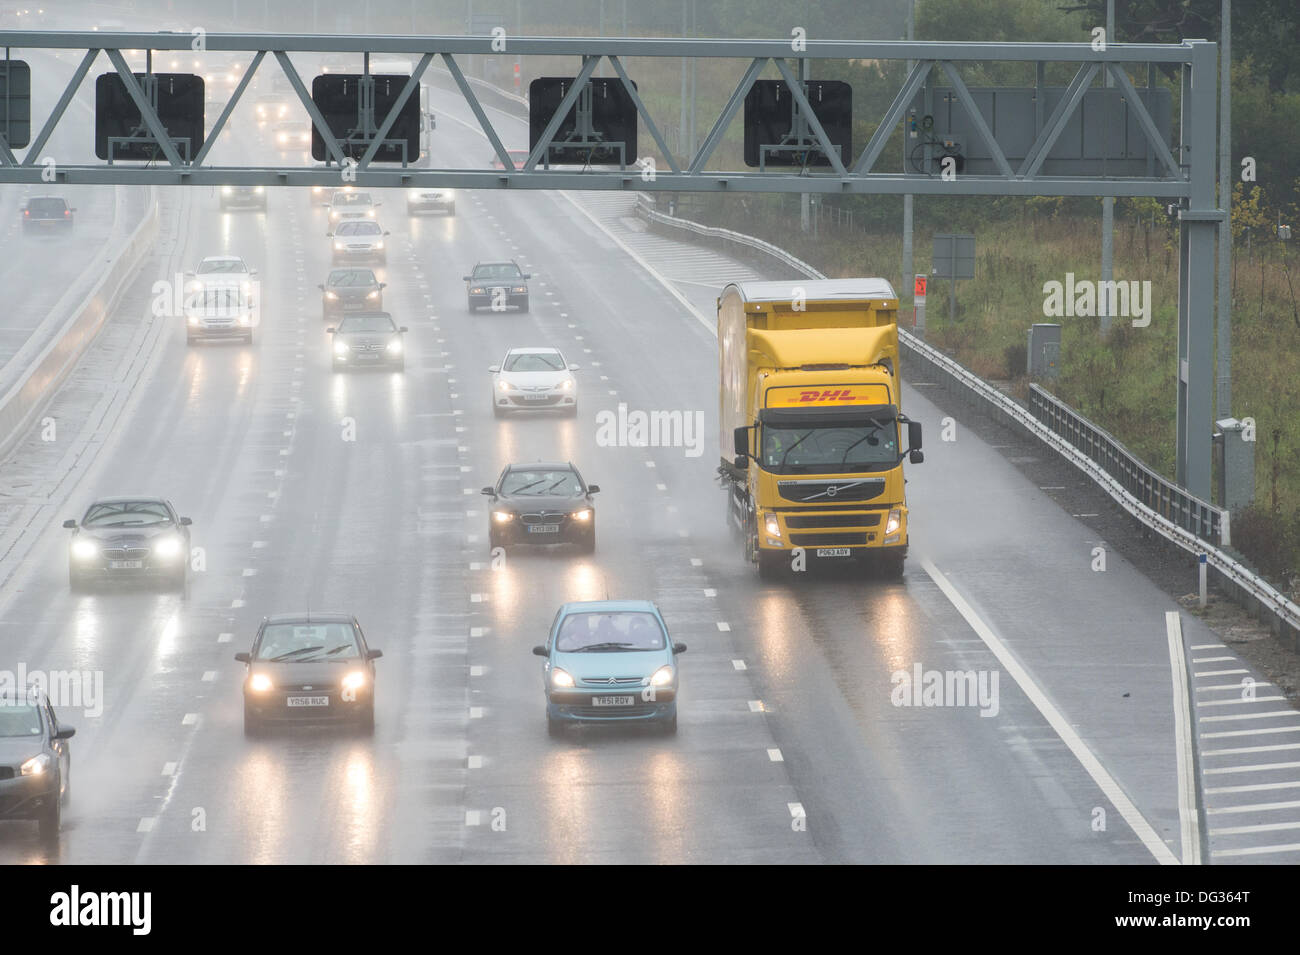 13th October 2013. M25 Essex. Heavy rain causes hazardous driving conditions for traffic passing through Essex on the M25. Surface water and spray reducing visibility makes for difficult driving. Stock Photo